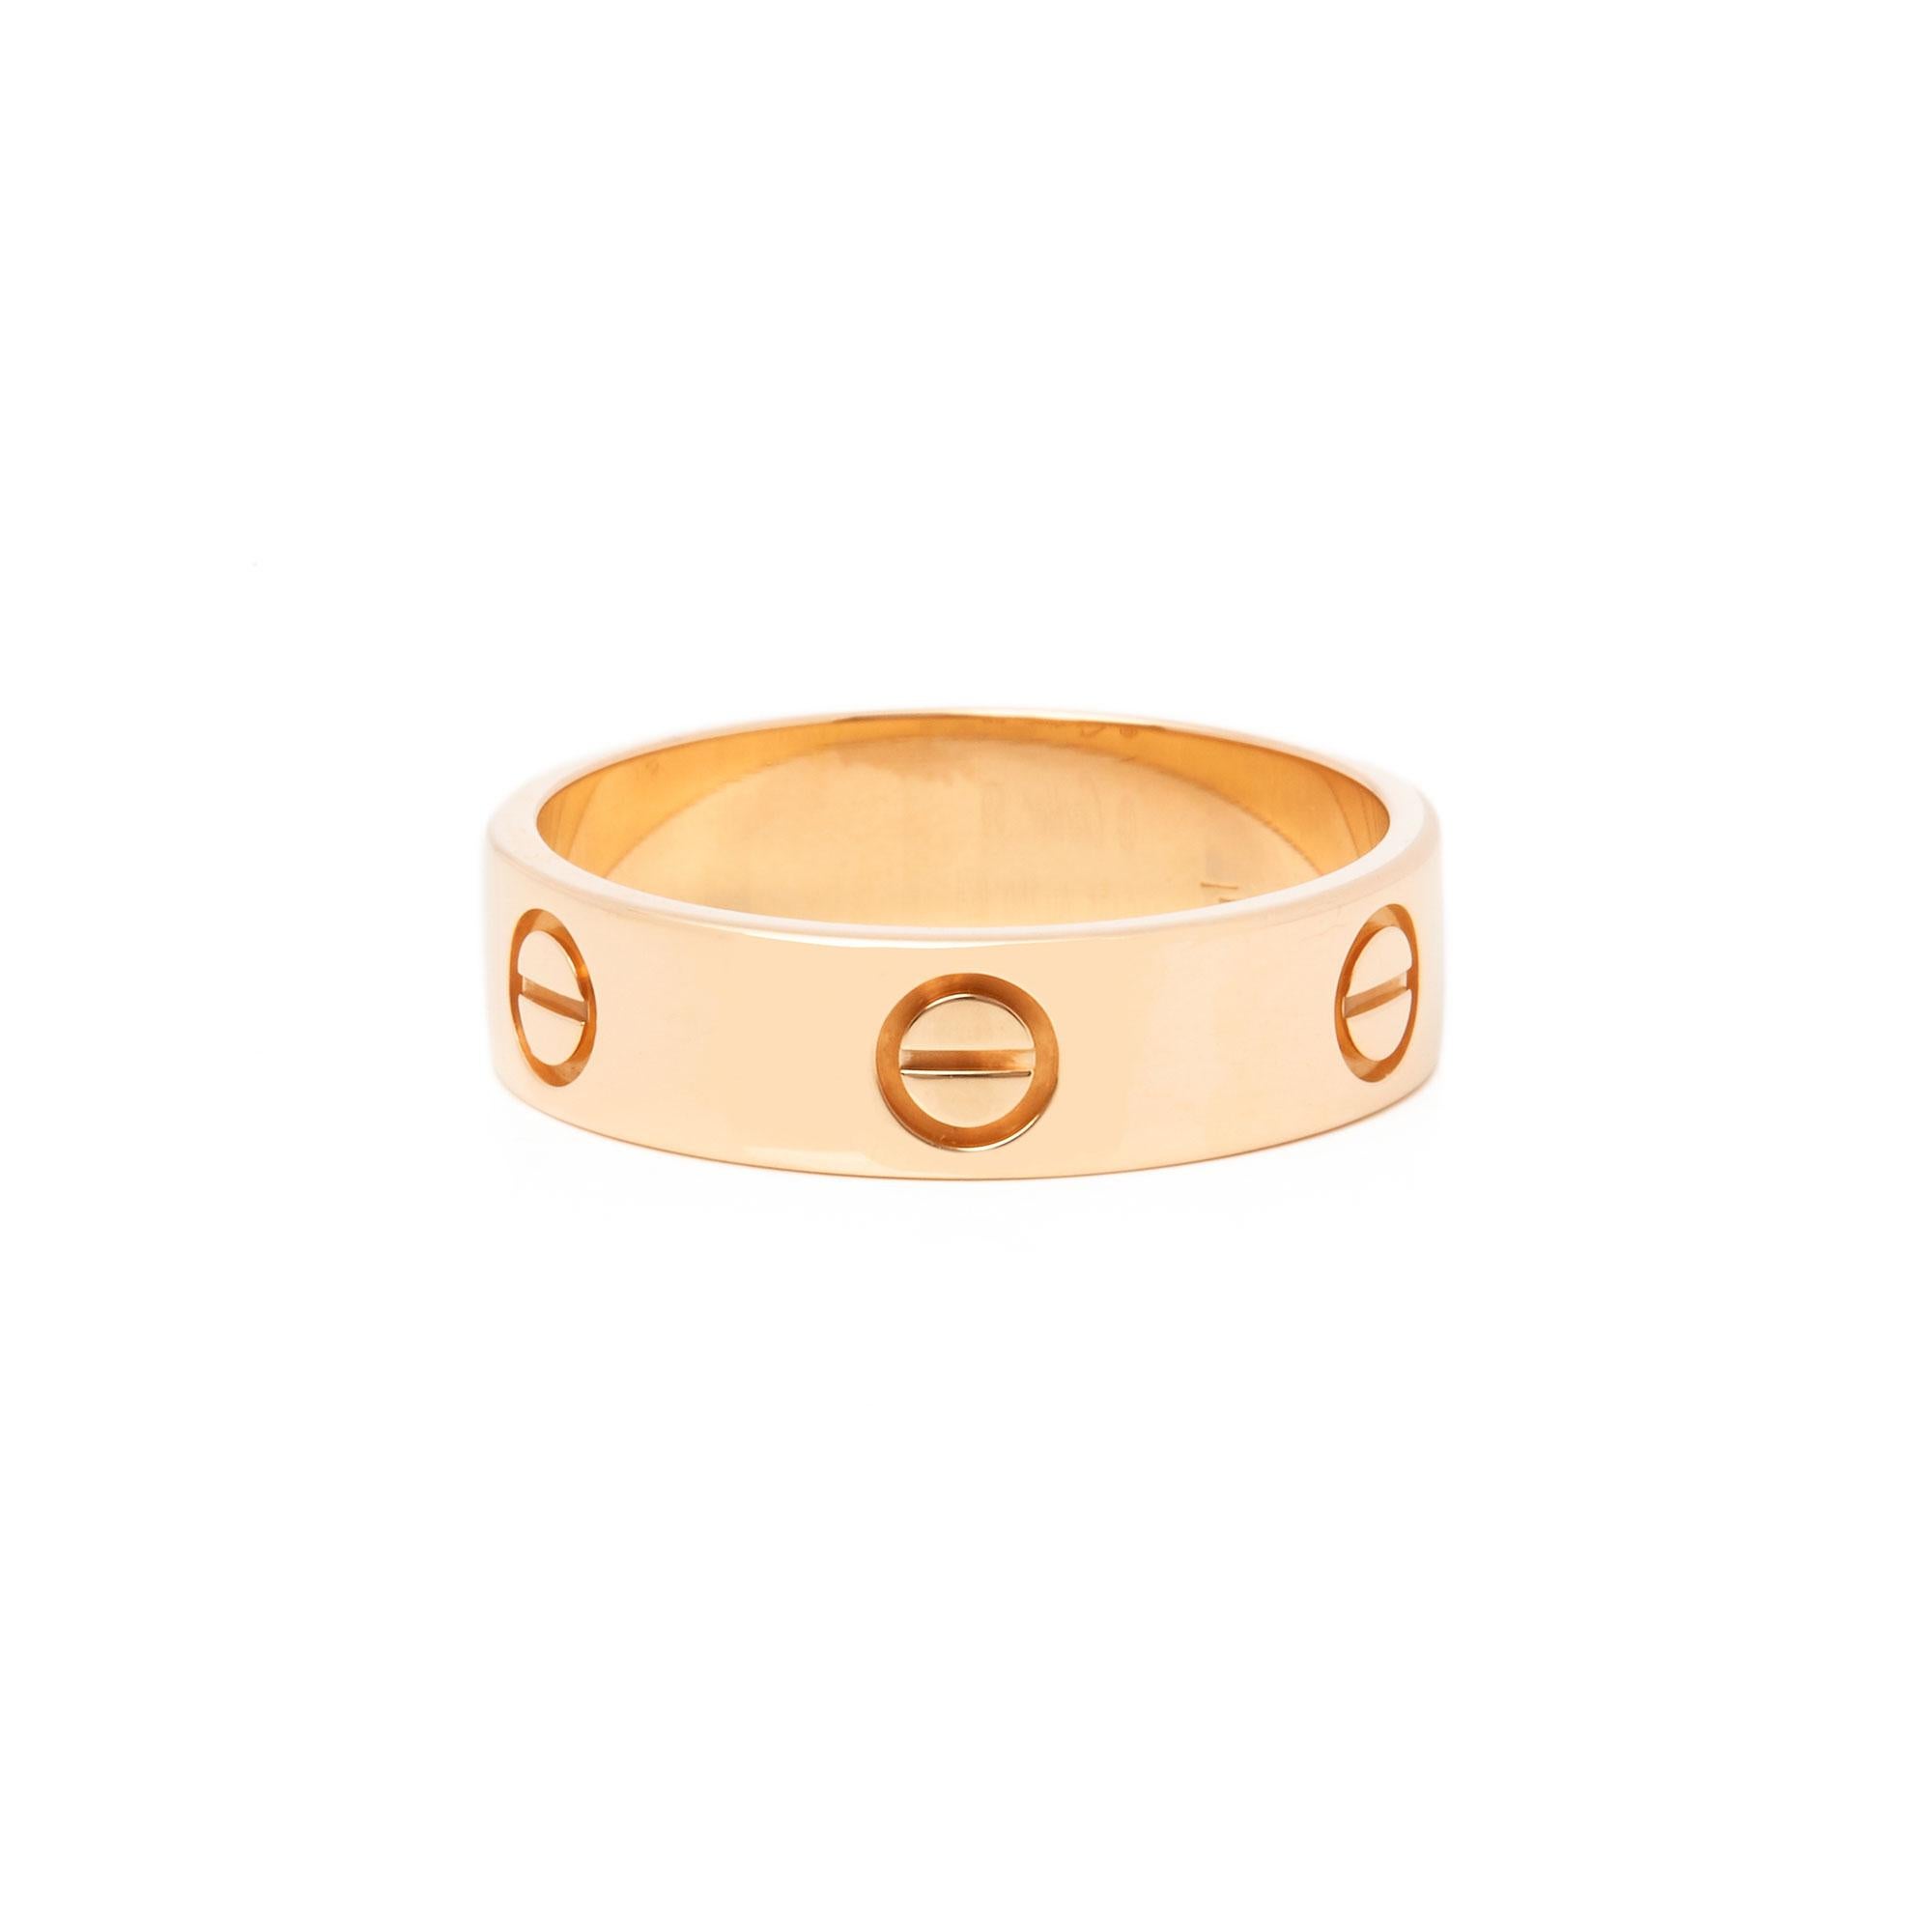 This ring by Cartier is from their Love Collection and features their iconic screw detailing set in 18ct yellow gold. UK Ring Size R, EU size 61, US size 9 1/2. Complete with Xupes presentation box. Our Xupes reference is COMJ464 should you need to